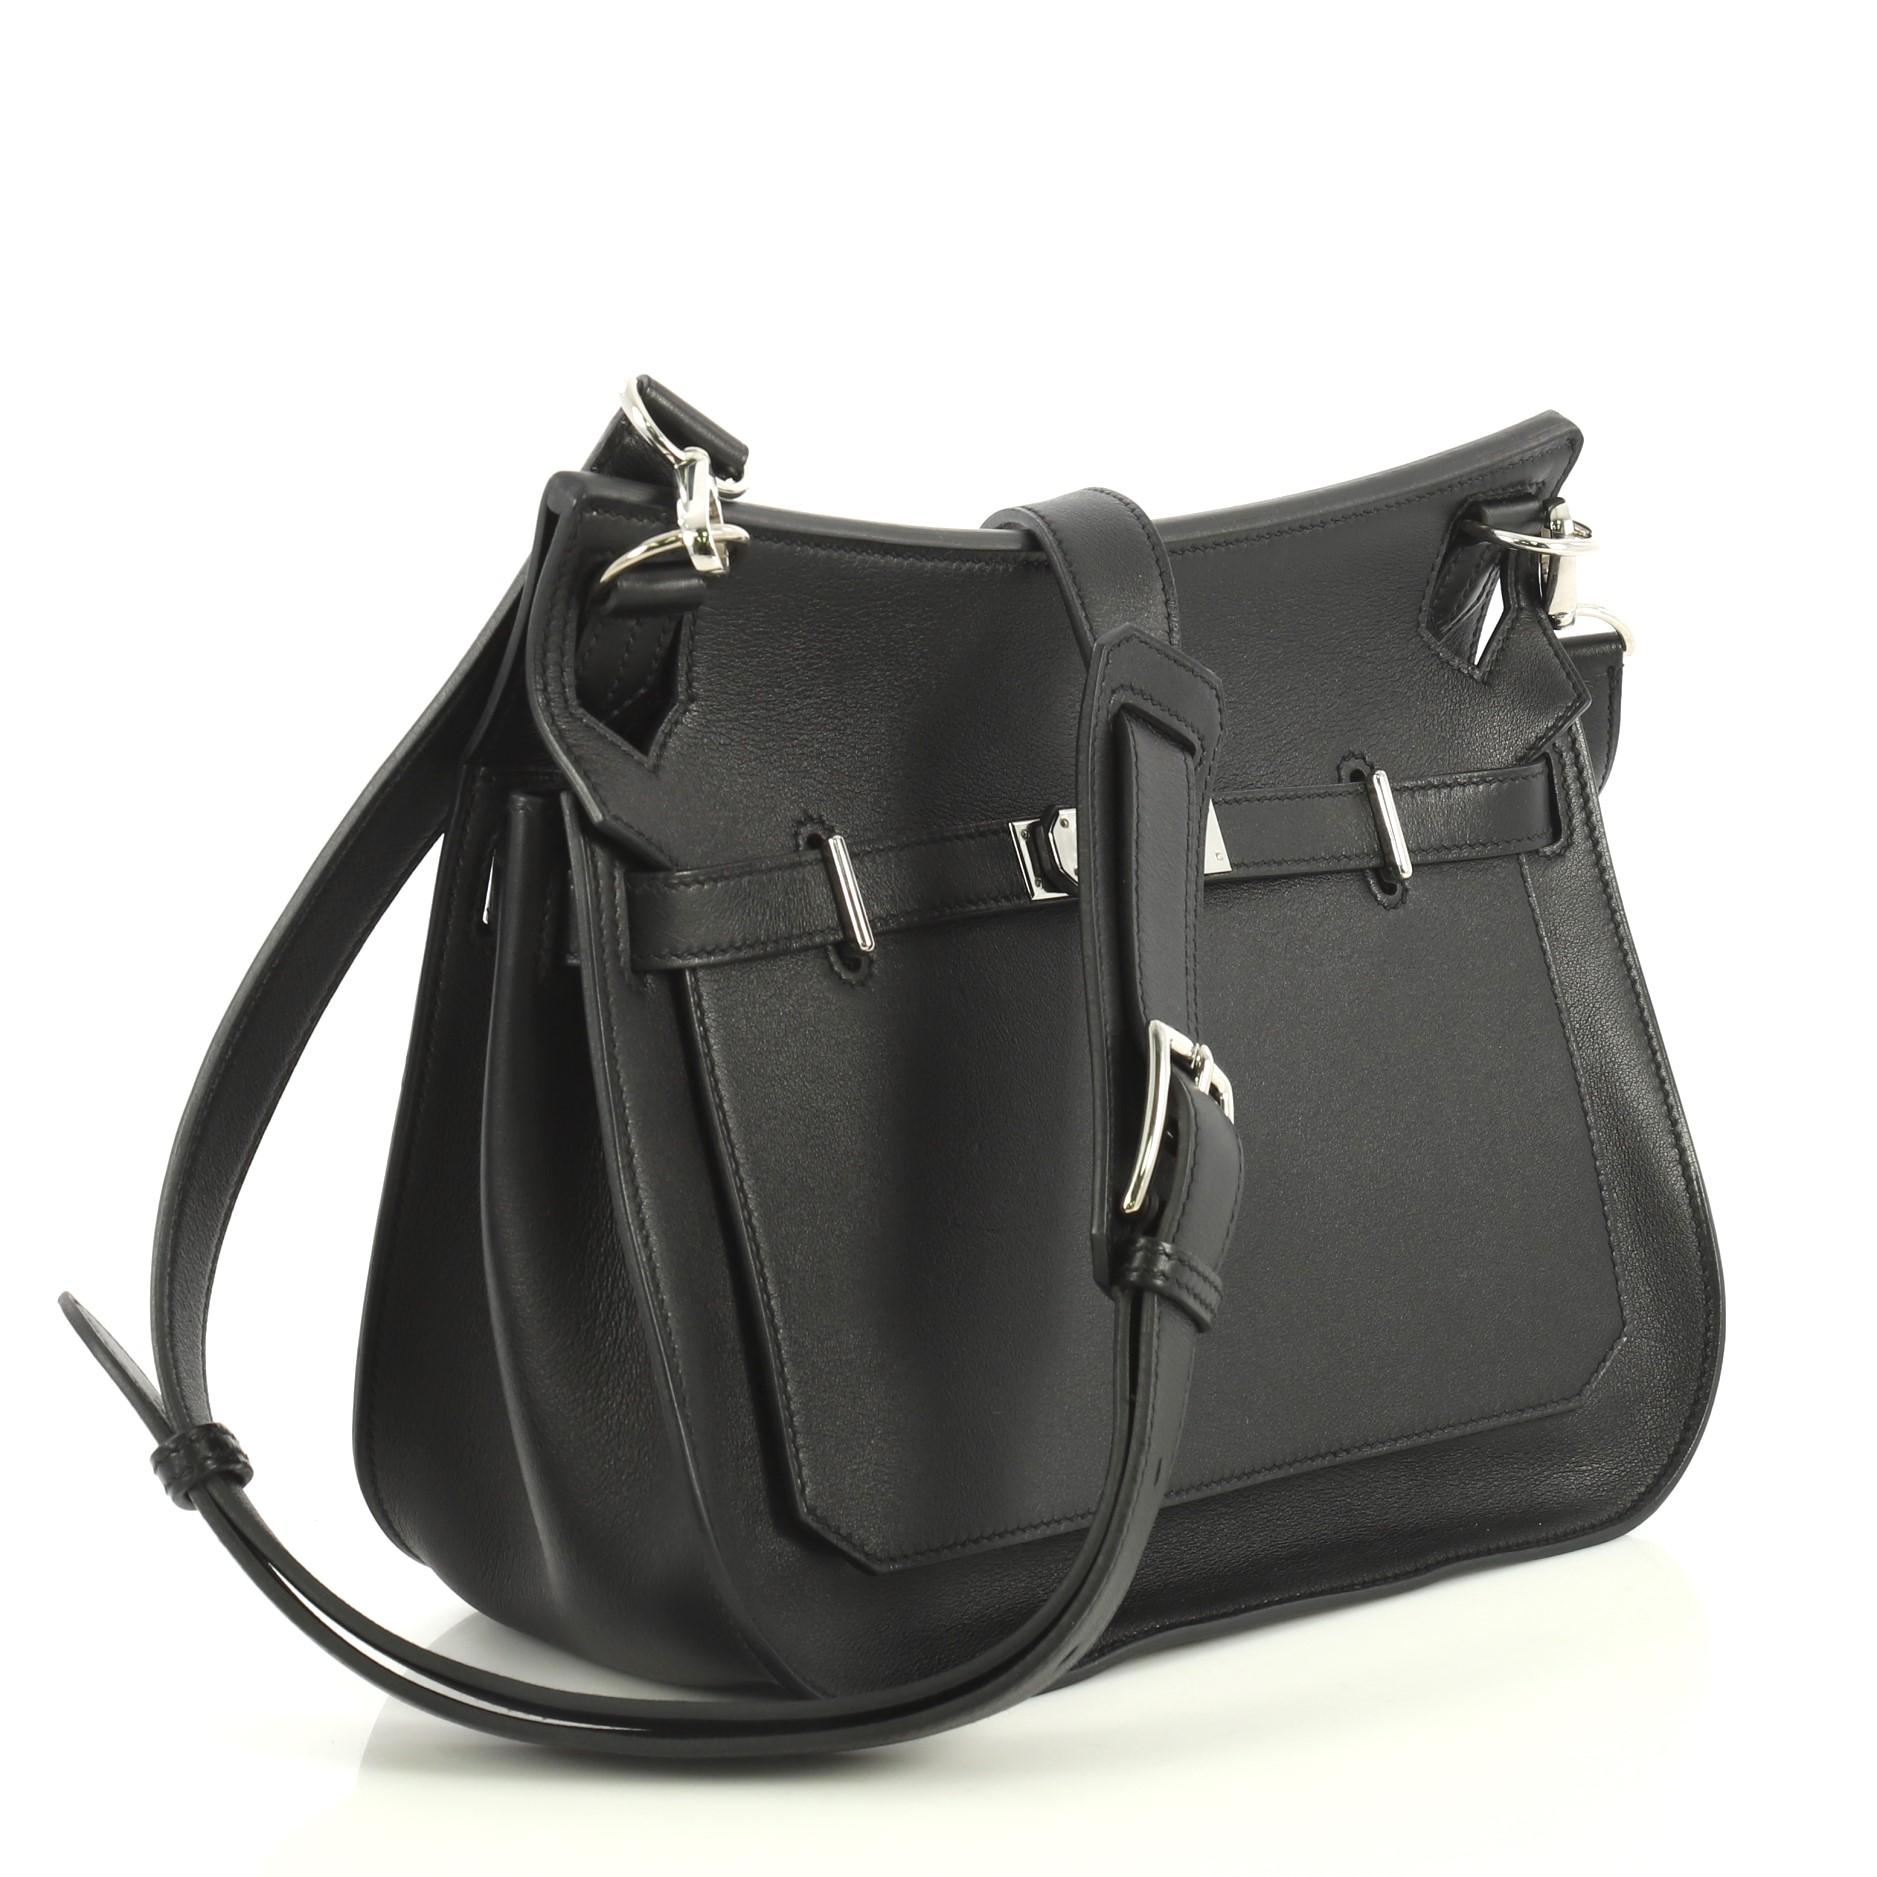 This Hermes Jypsiere Handbag Swift 28, crafted in Noir black Swift leather, features a long adjustable strap and palladium hardware. Its turn-lock clasp closure opens to a Noir black Swift leather interior with slip and zip pockets. Date stamp